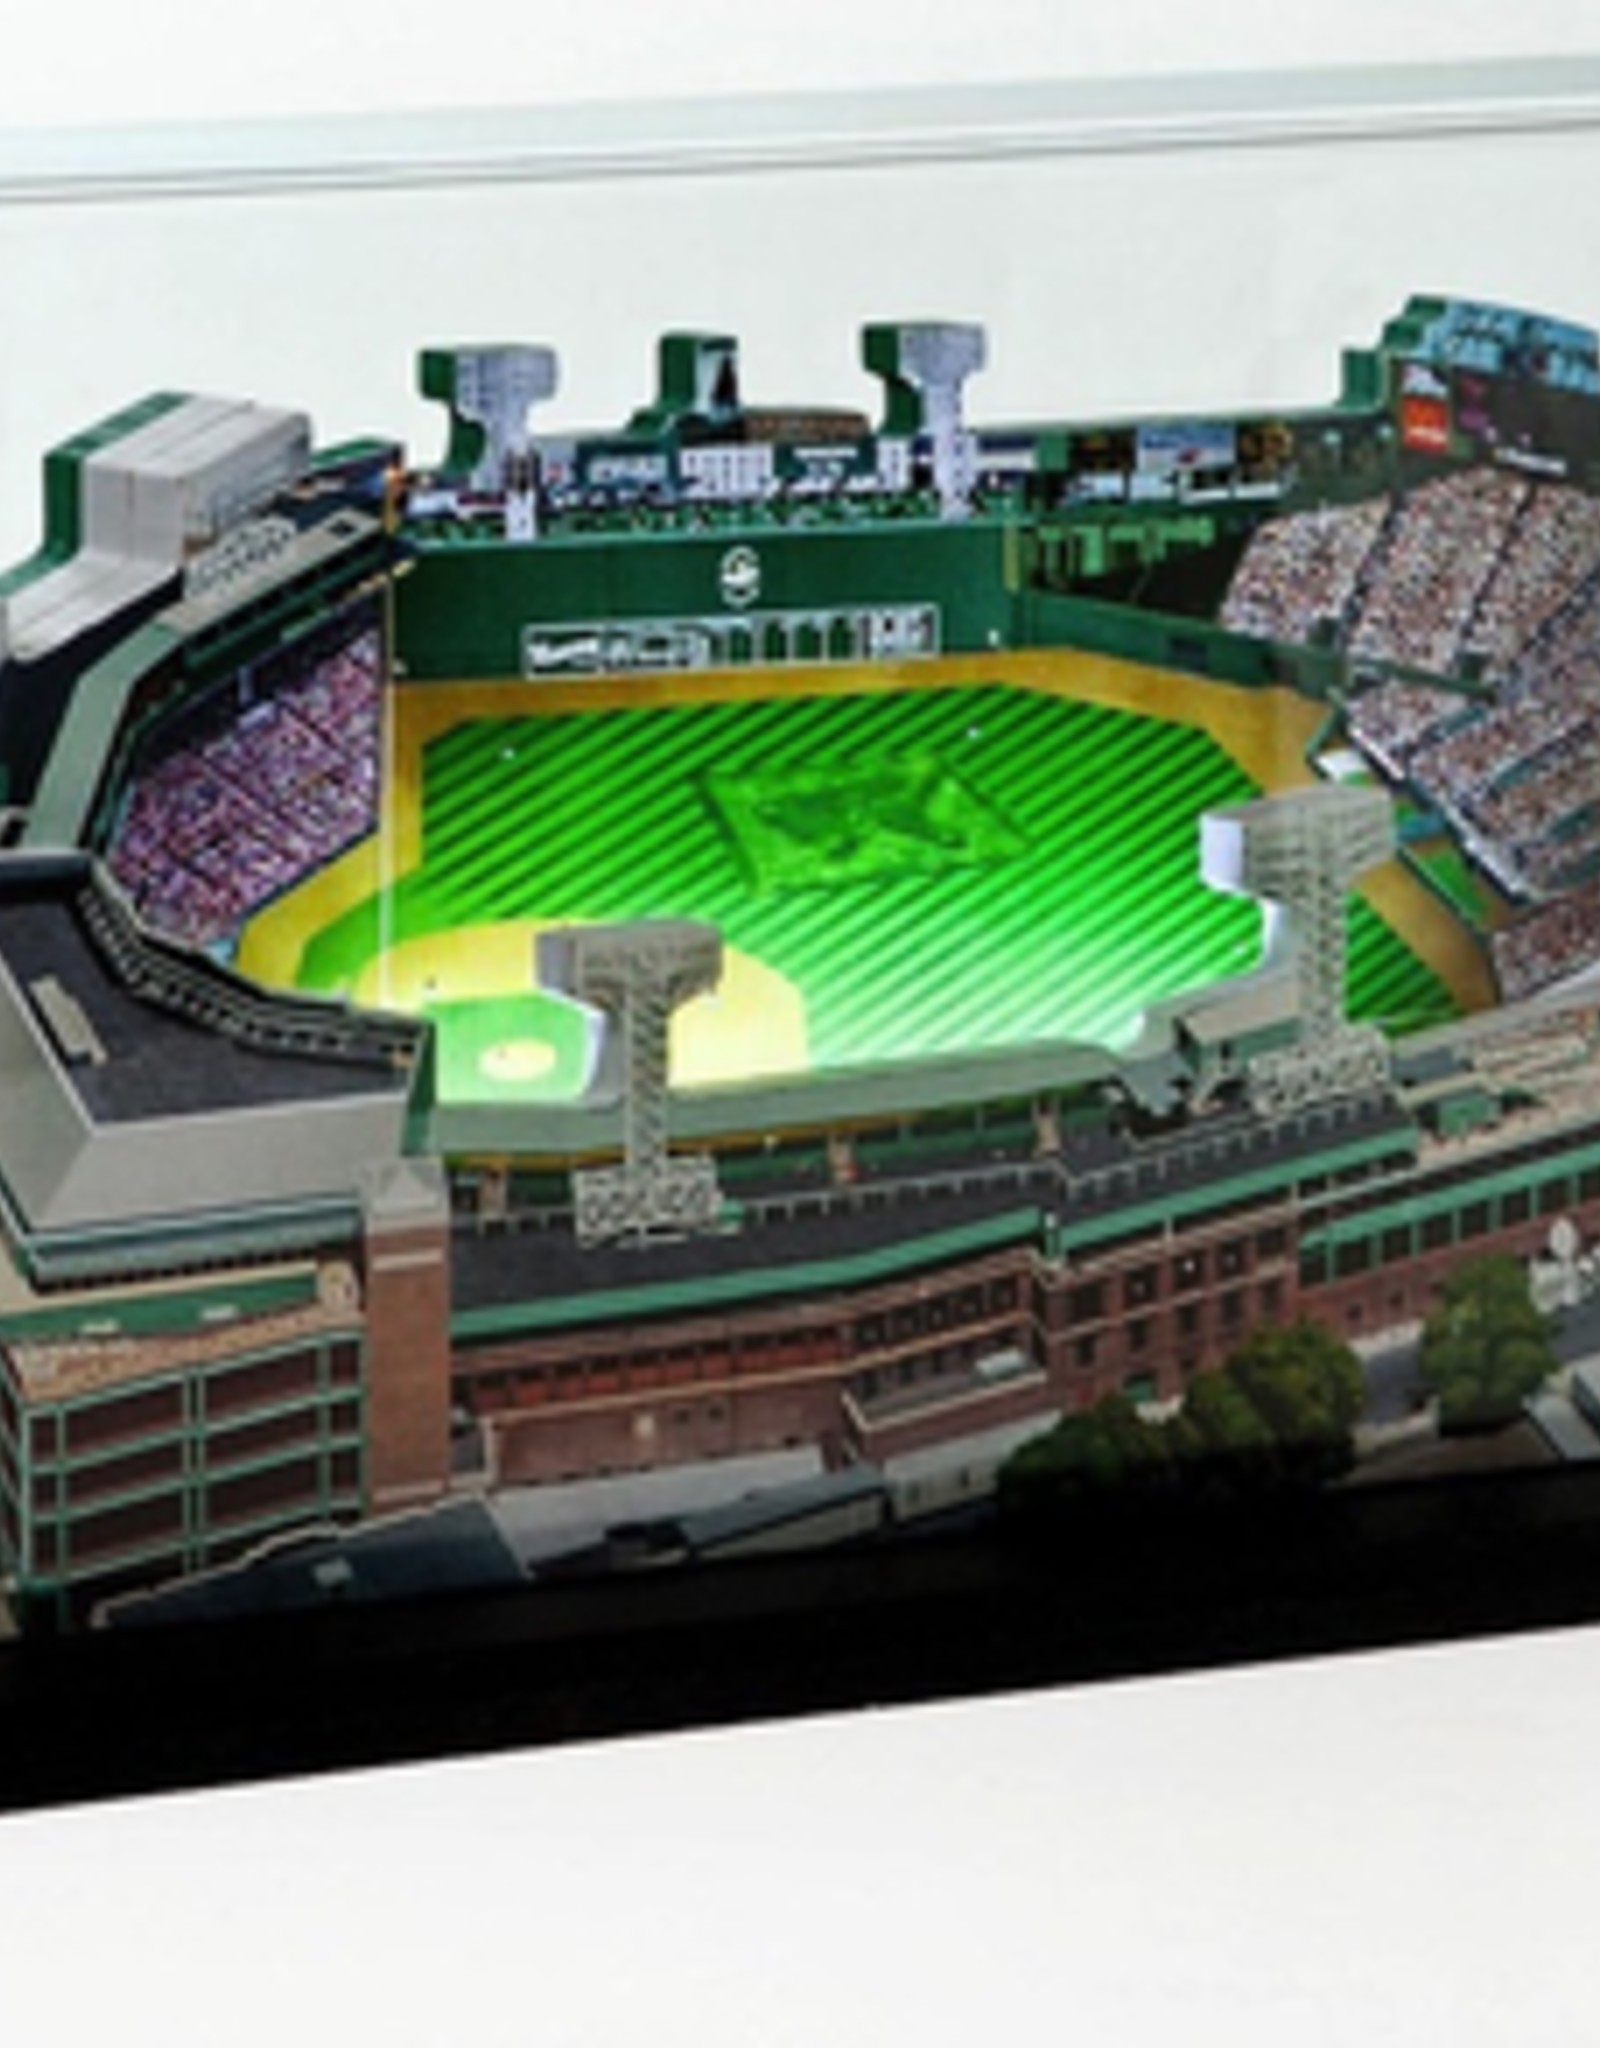 HOMEFIELDS Red Sox HomeField - Fenway Park 19IN